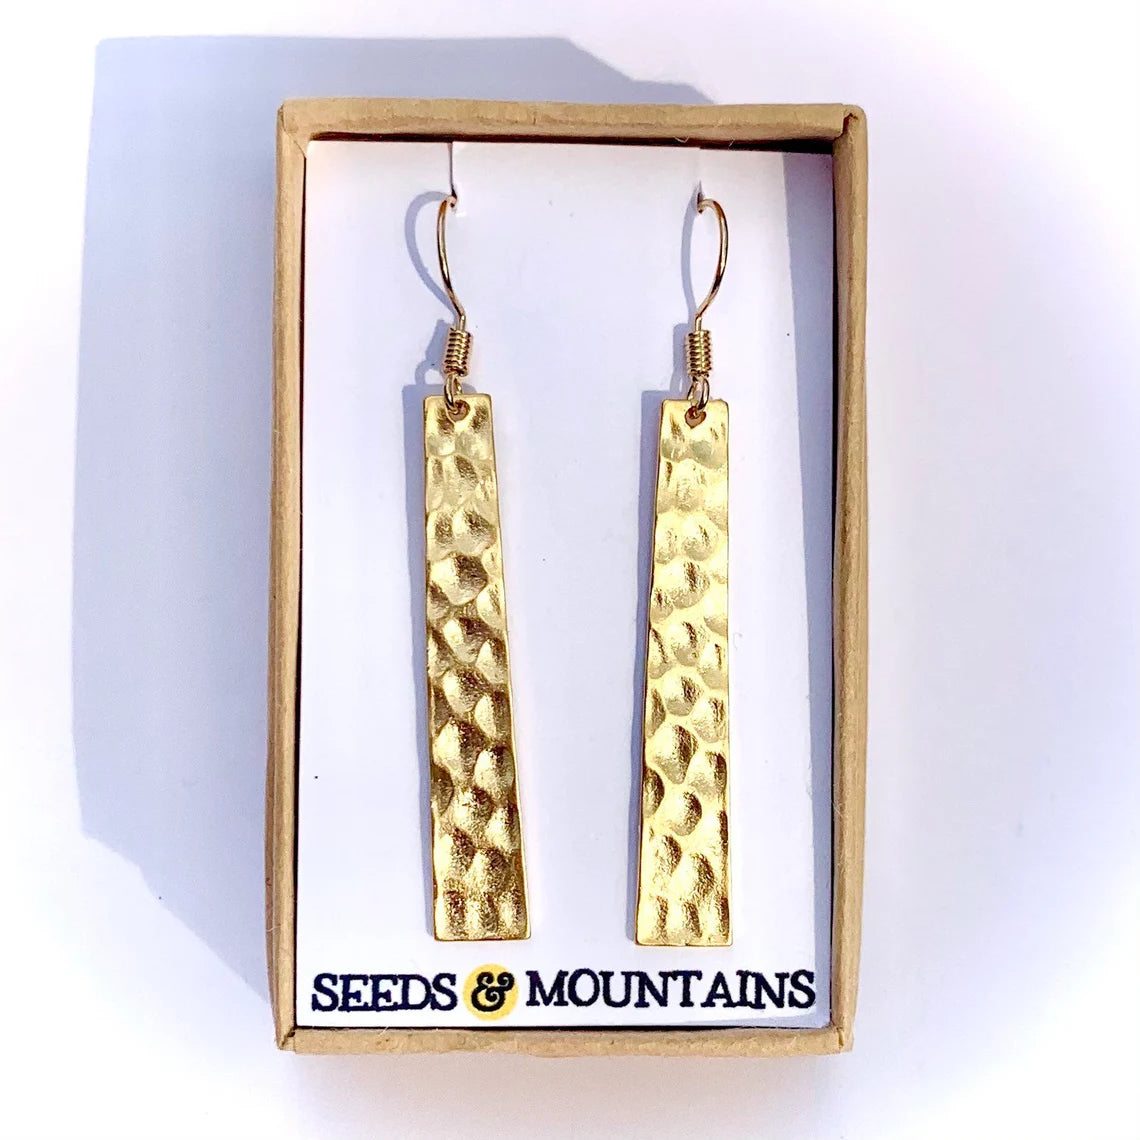 Hammered Gold Earrings